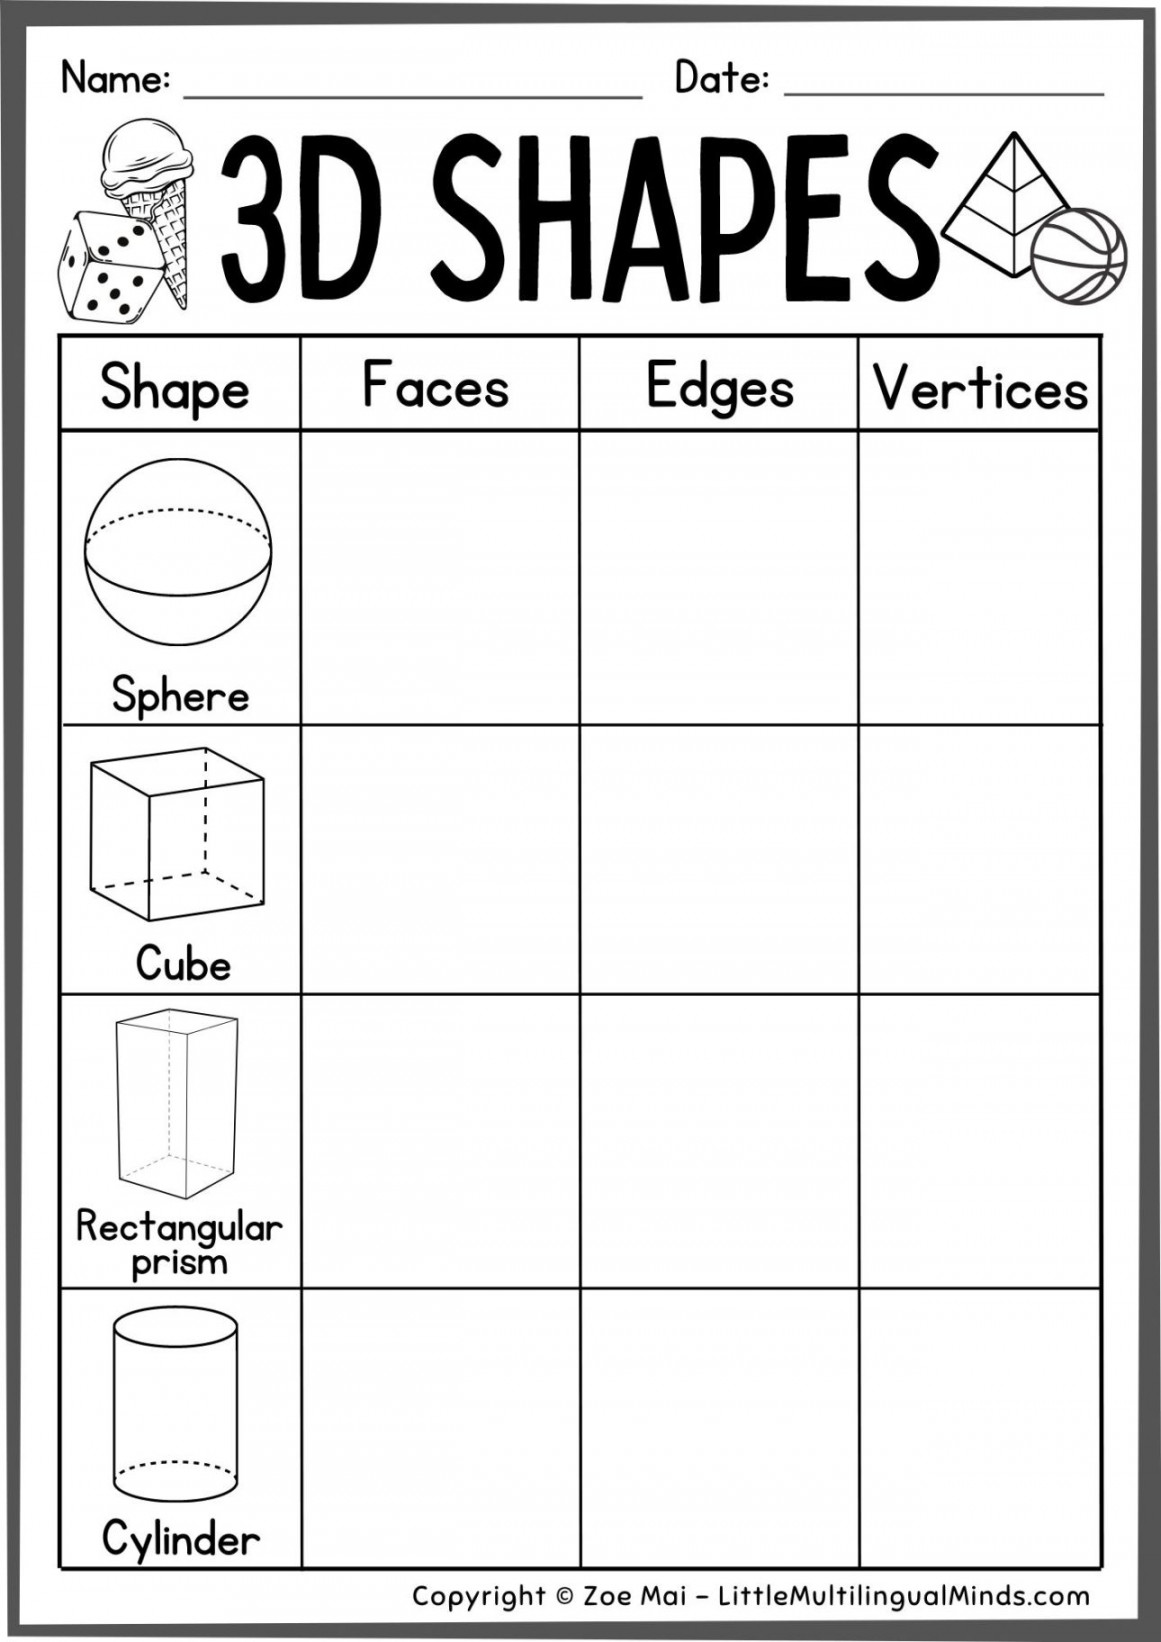 Free Printable D Shapes Chart and Fun Activities Ideas for Kids